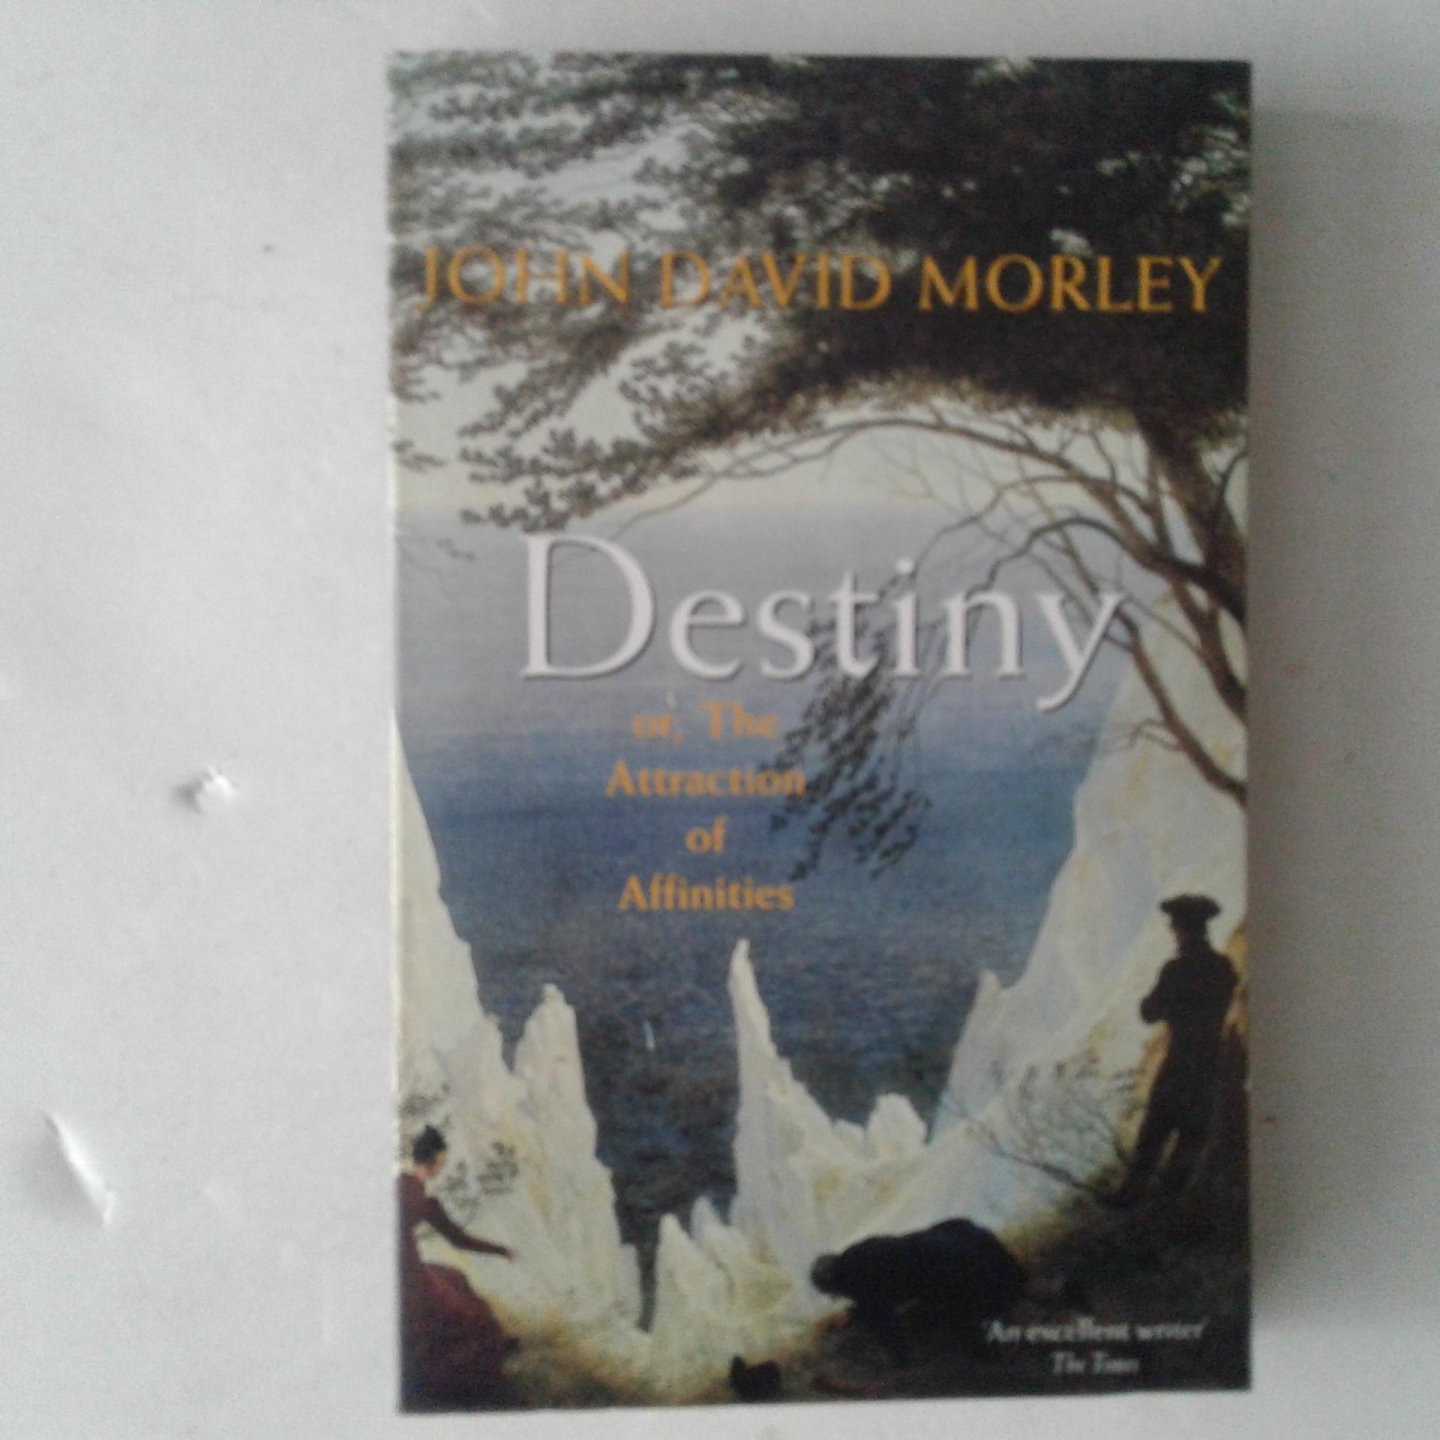 Morley, John David - Destiny or the Attraction of Affinities